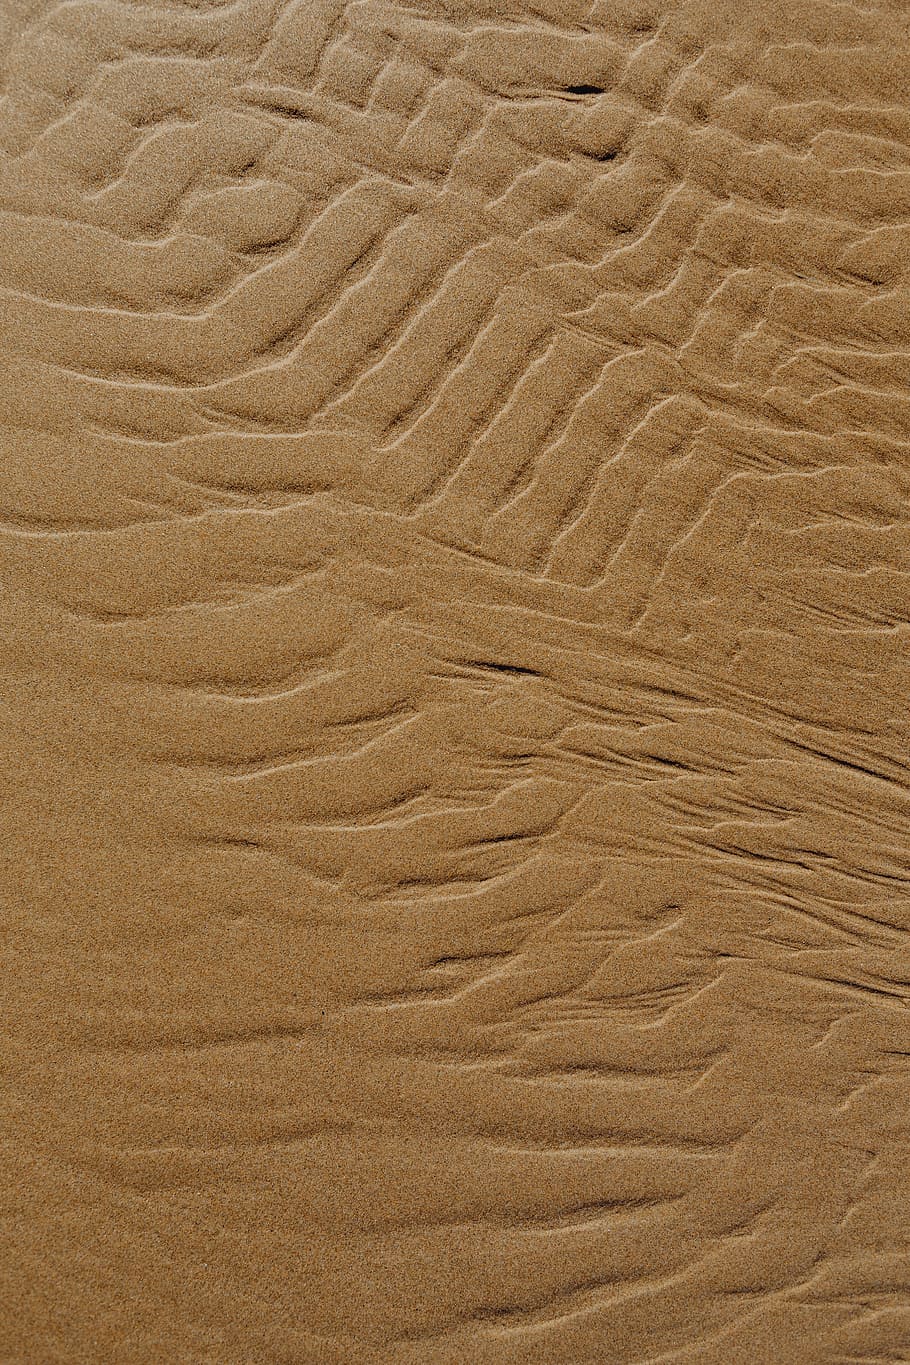 abstract, line, designed, water, sand texture, beach, sand, background, texture, pattern